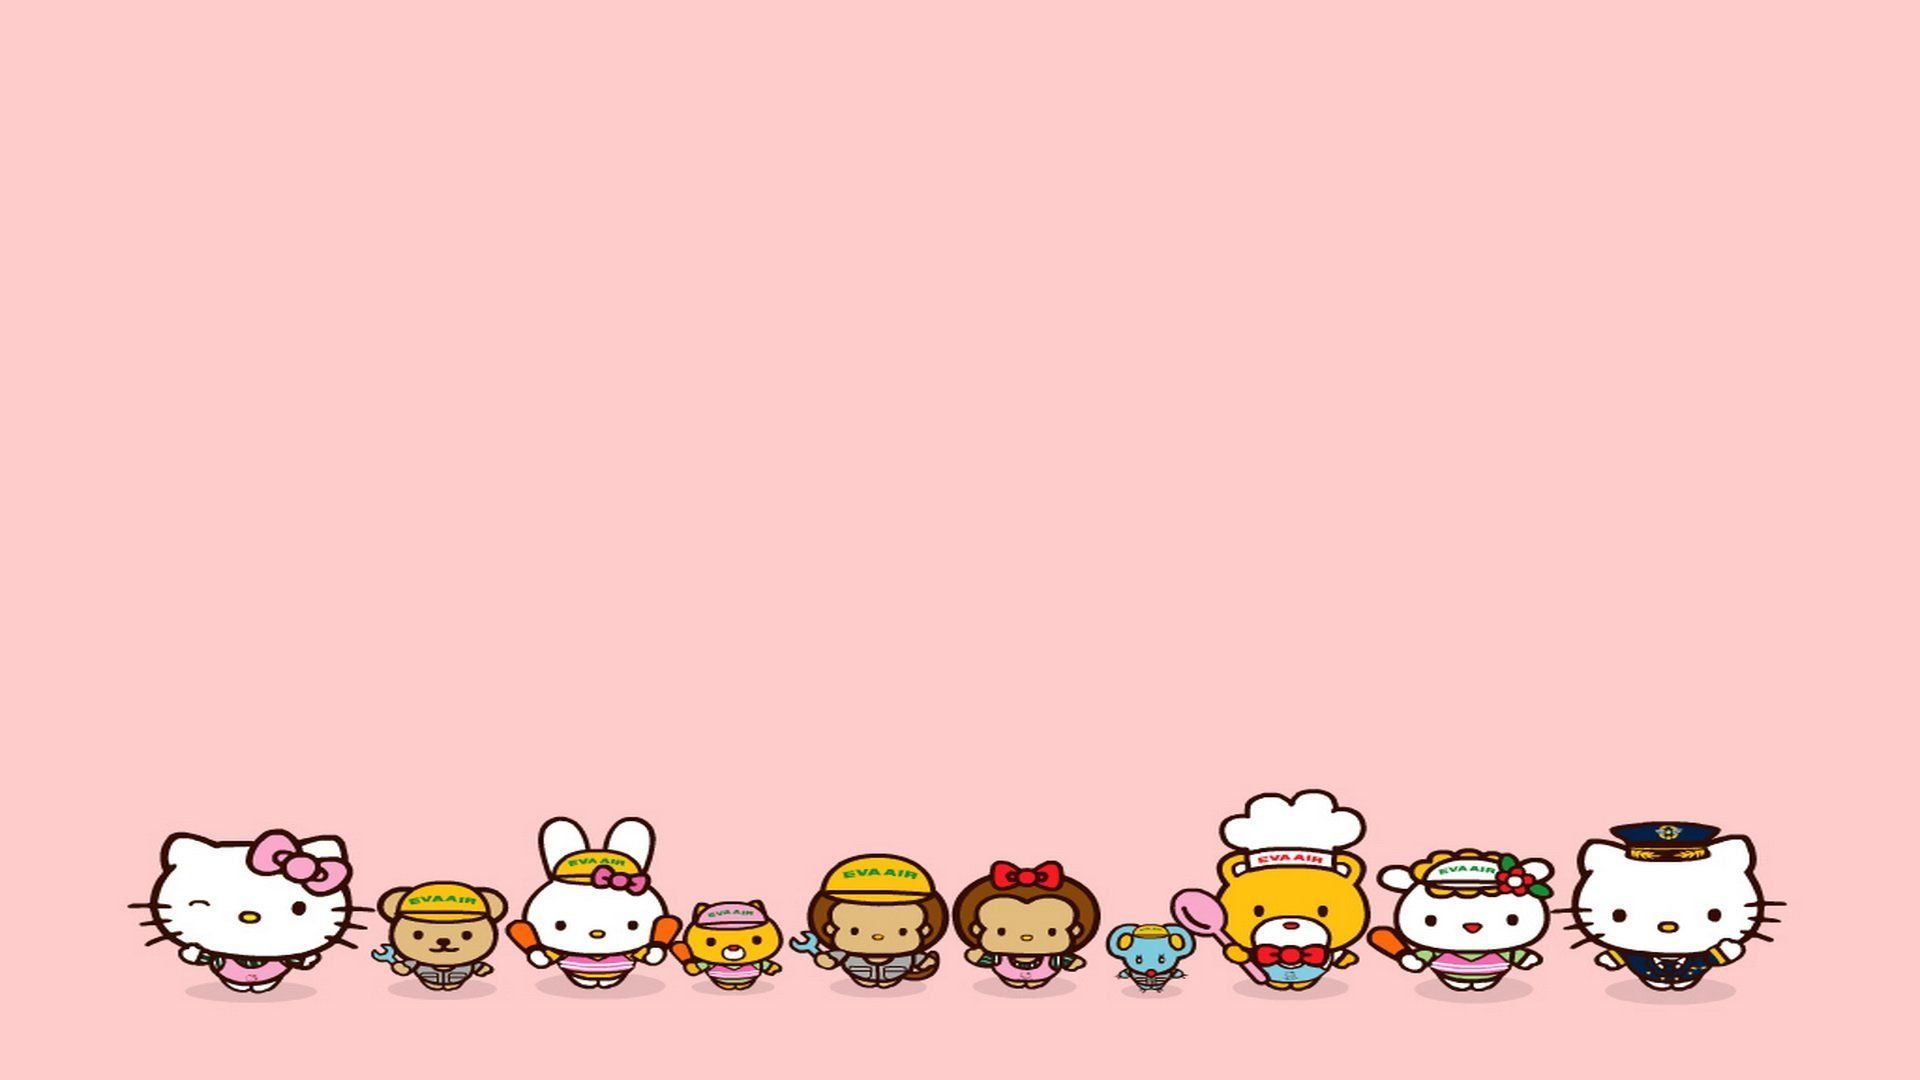 Hello Kitty Wallpaper with high-resolution 1920x1080 pixel. You can use this wallpaper for your Windows and Mac OS computers as well as your Android and iPhone smartphones - Hello Kitty